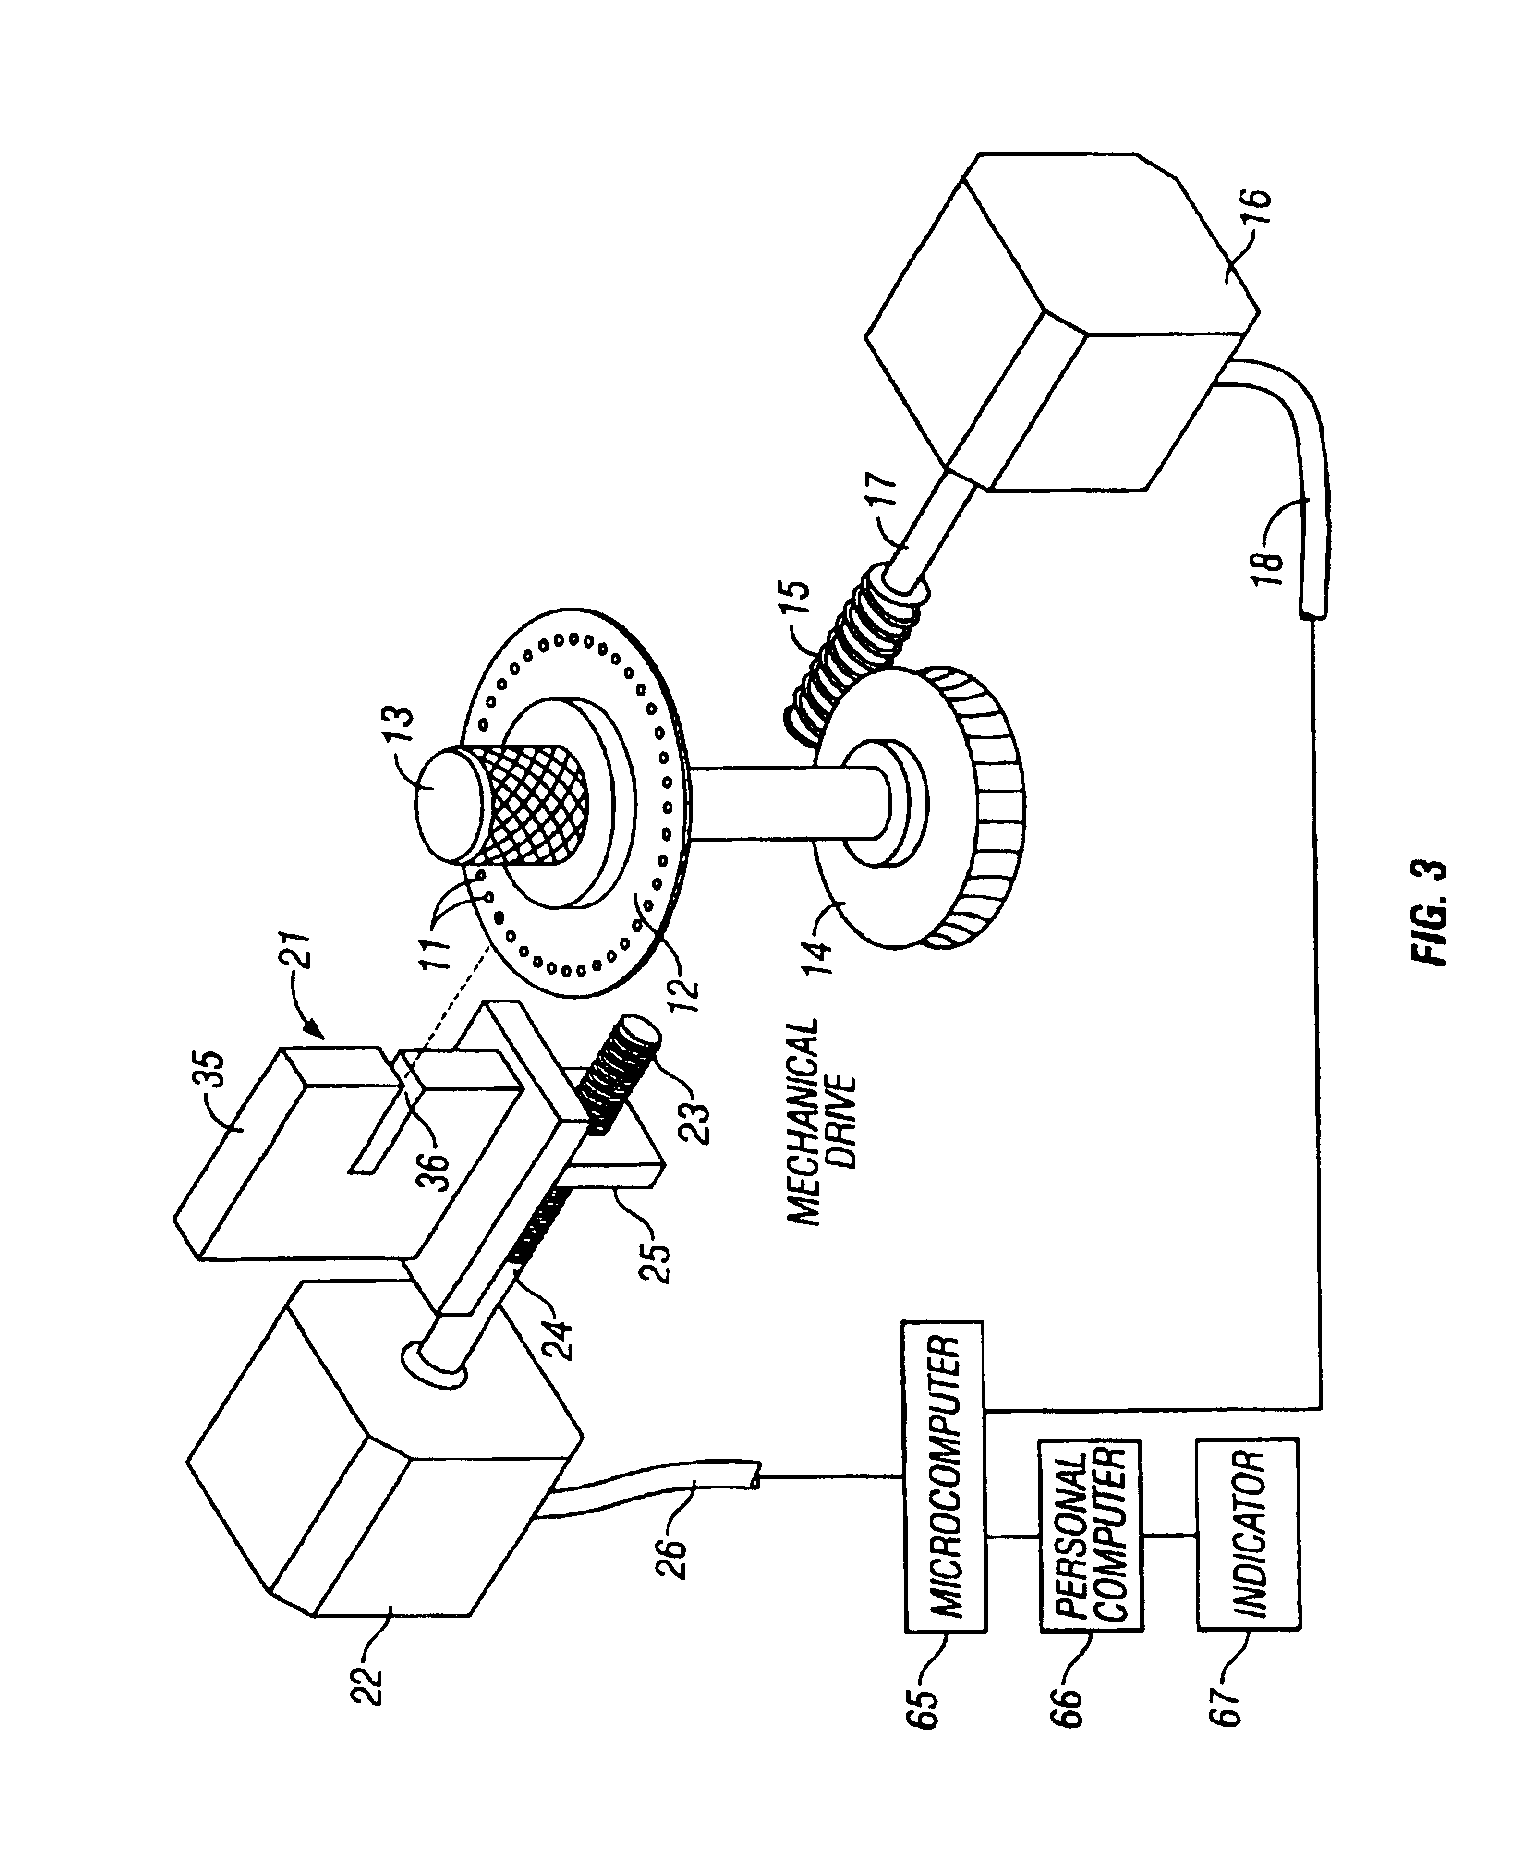 Method and apparatus for making measurements of accumulations of magnetically susceptible particles combined with analytes